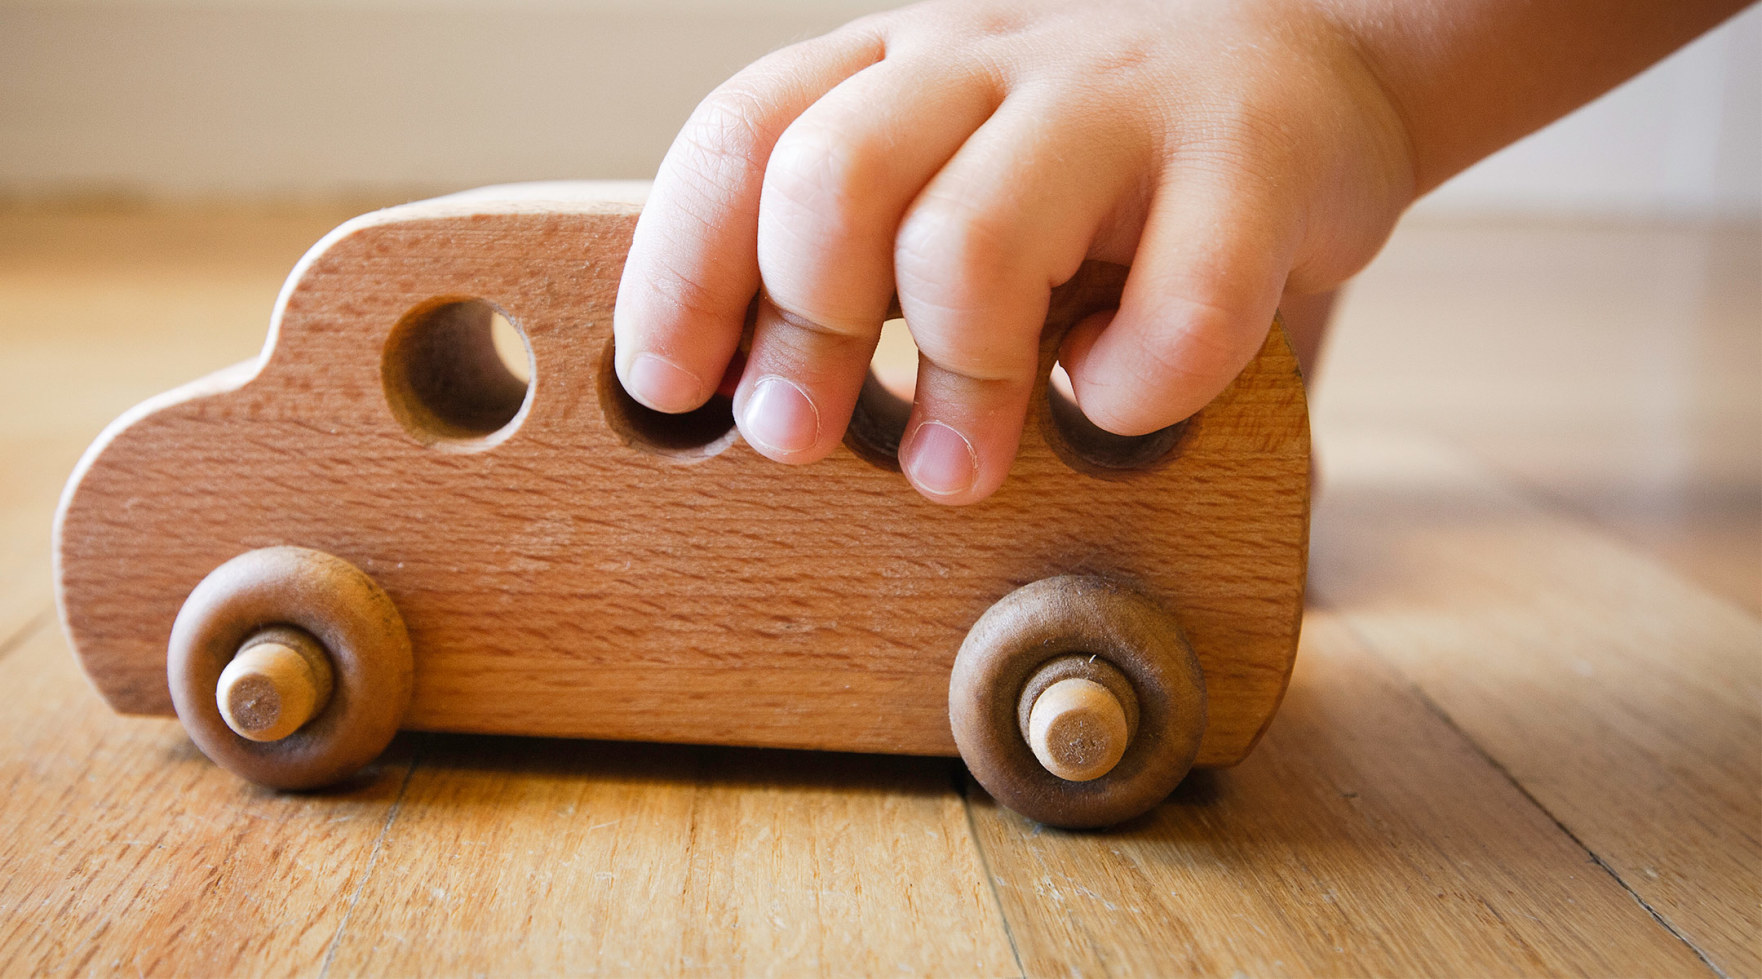 Gift Guide: Wooden toys made in South Africa